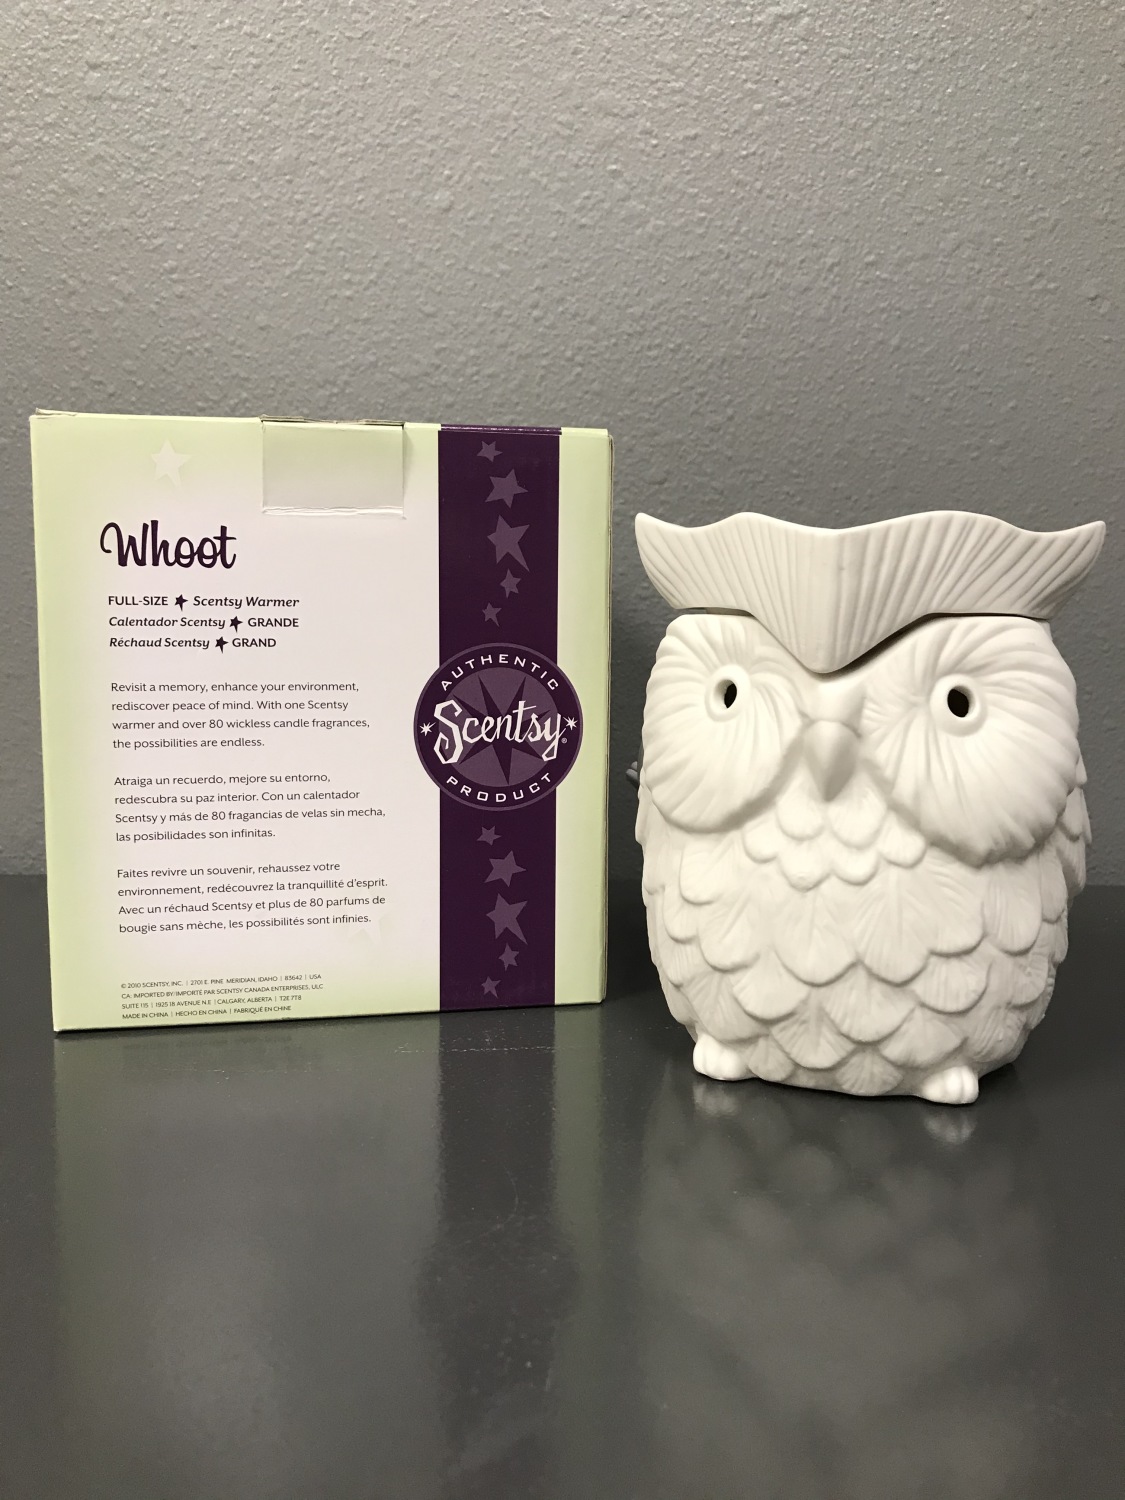 Whoot Scentsy Warmer, ypdangiestrongauction